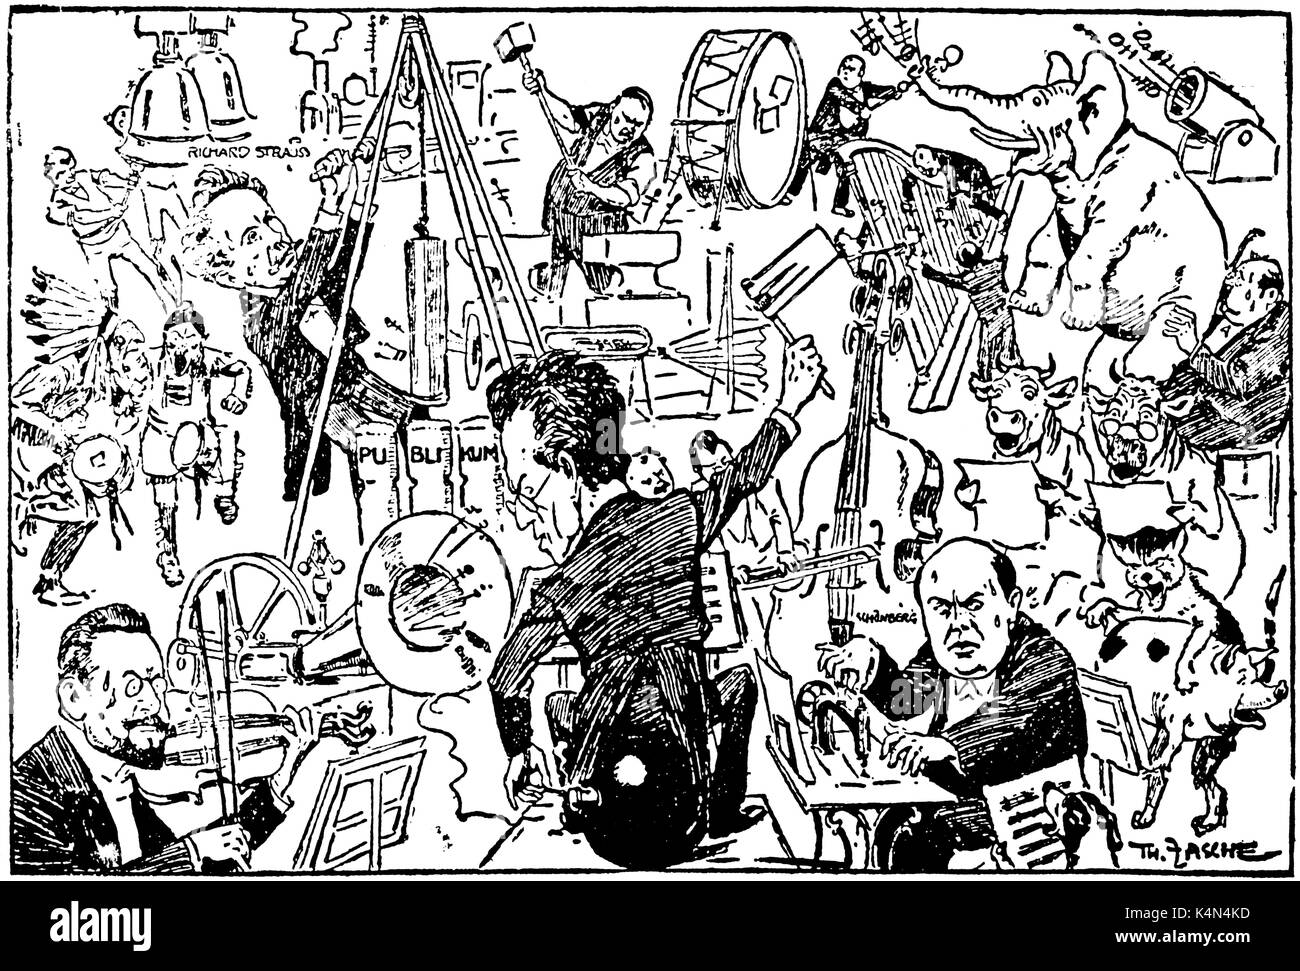 Gustav Mahler in caricature by Theo Zasche. 'The Modern Orchestra'. Austrian composer, 1860-1911.  Mahler, sitting on bomb, conducts with a rattle, Schoenberg works at a sewing machine, Strauss drops a heavy weight on the public, Arnold Rose (Mahler's brother-in-law) plays a double violin with two bows. 1st pub. 'Illustrierten Wierner Extrablatt', 31st March 1907. Stock Photo